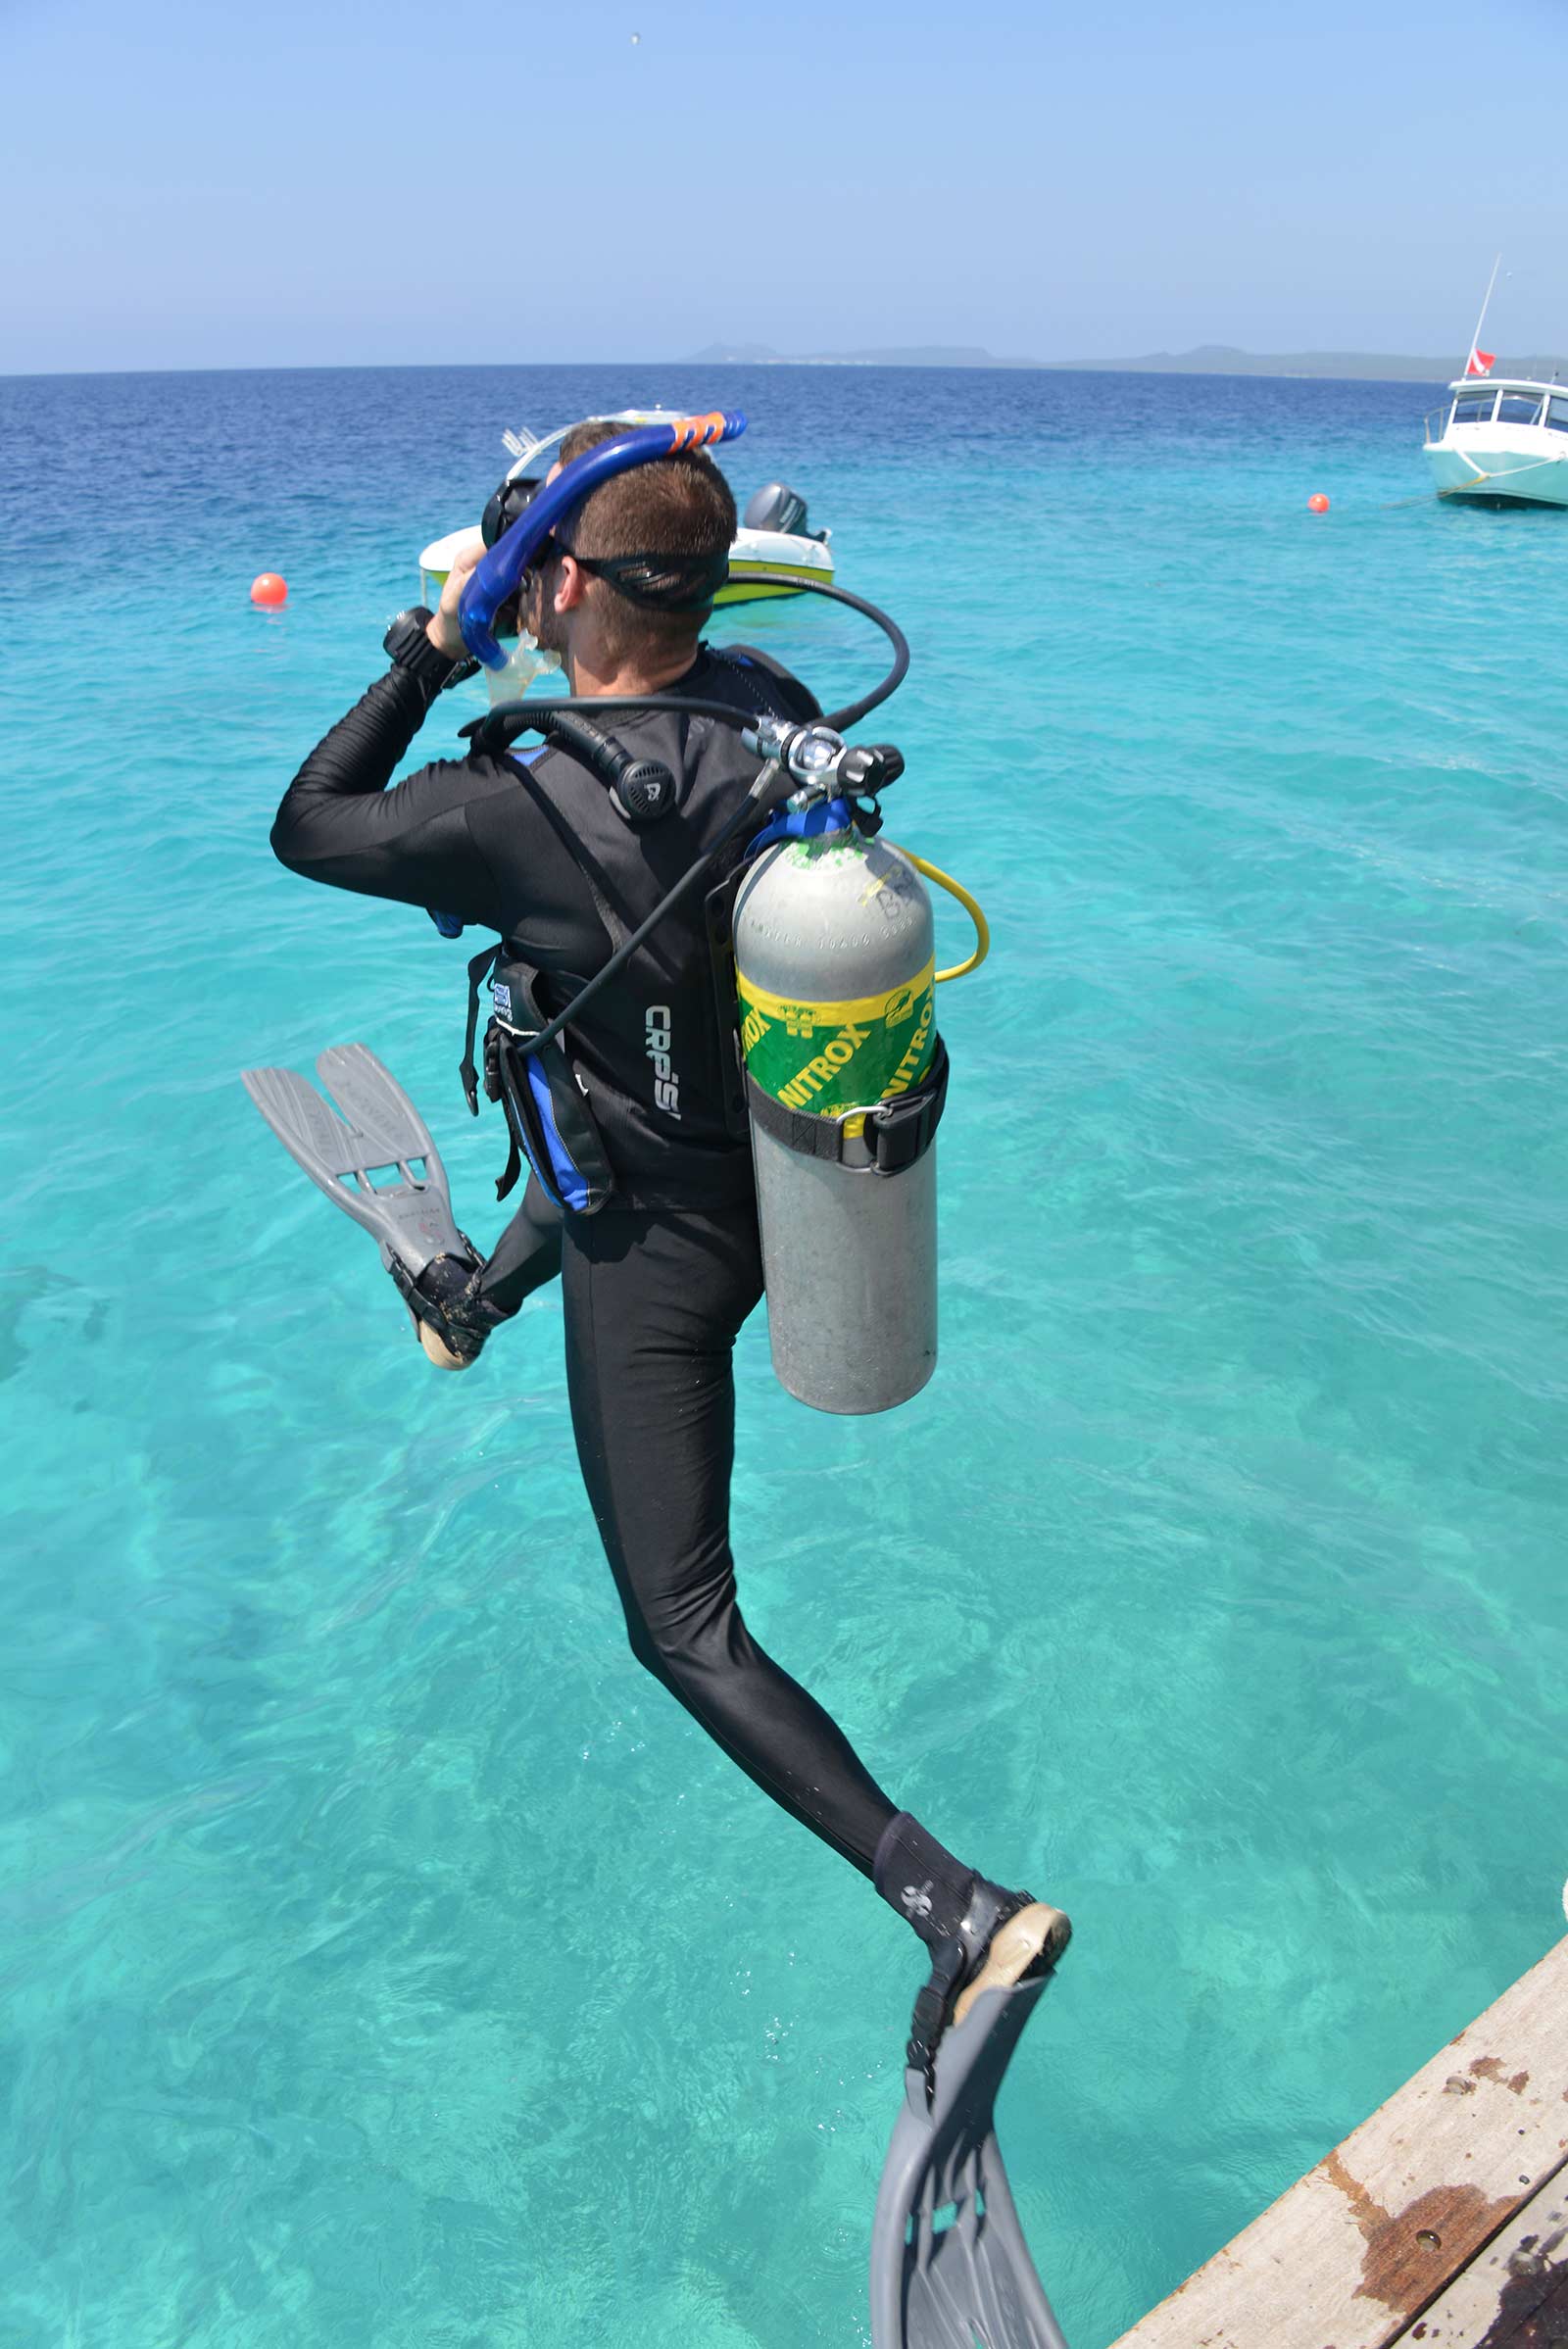 How long can a scuba diver stay at 100 feet